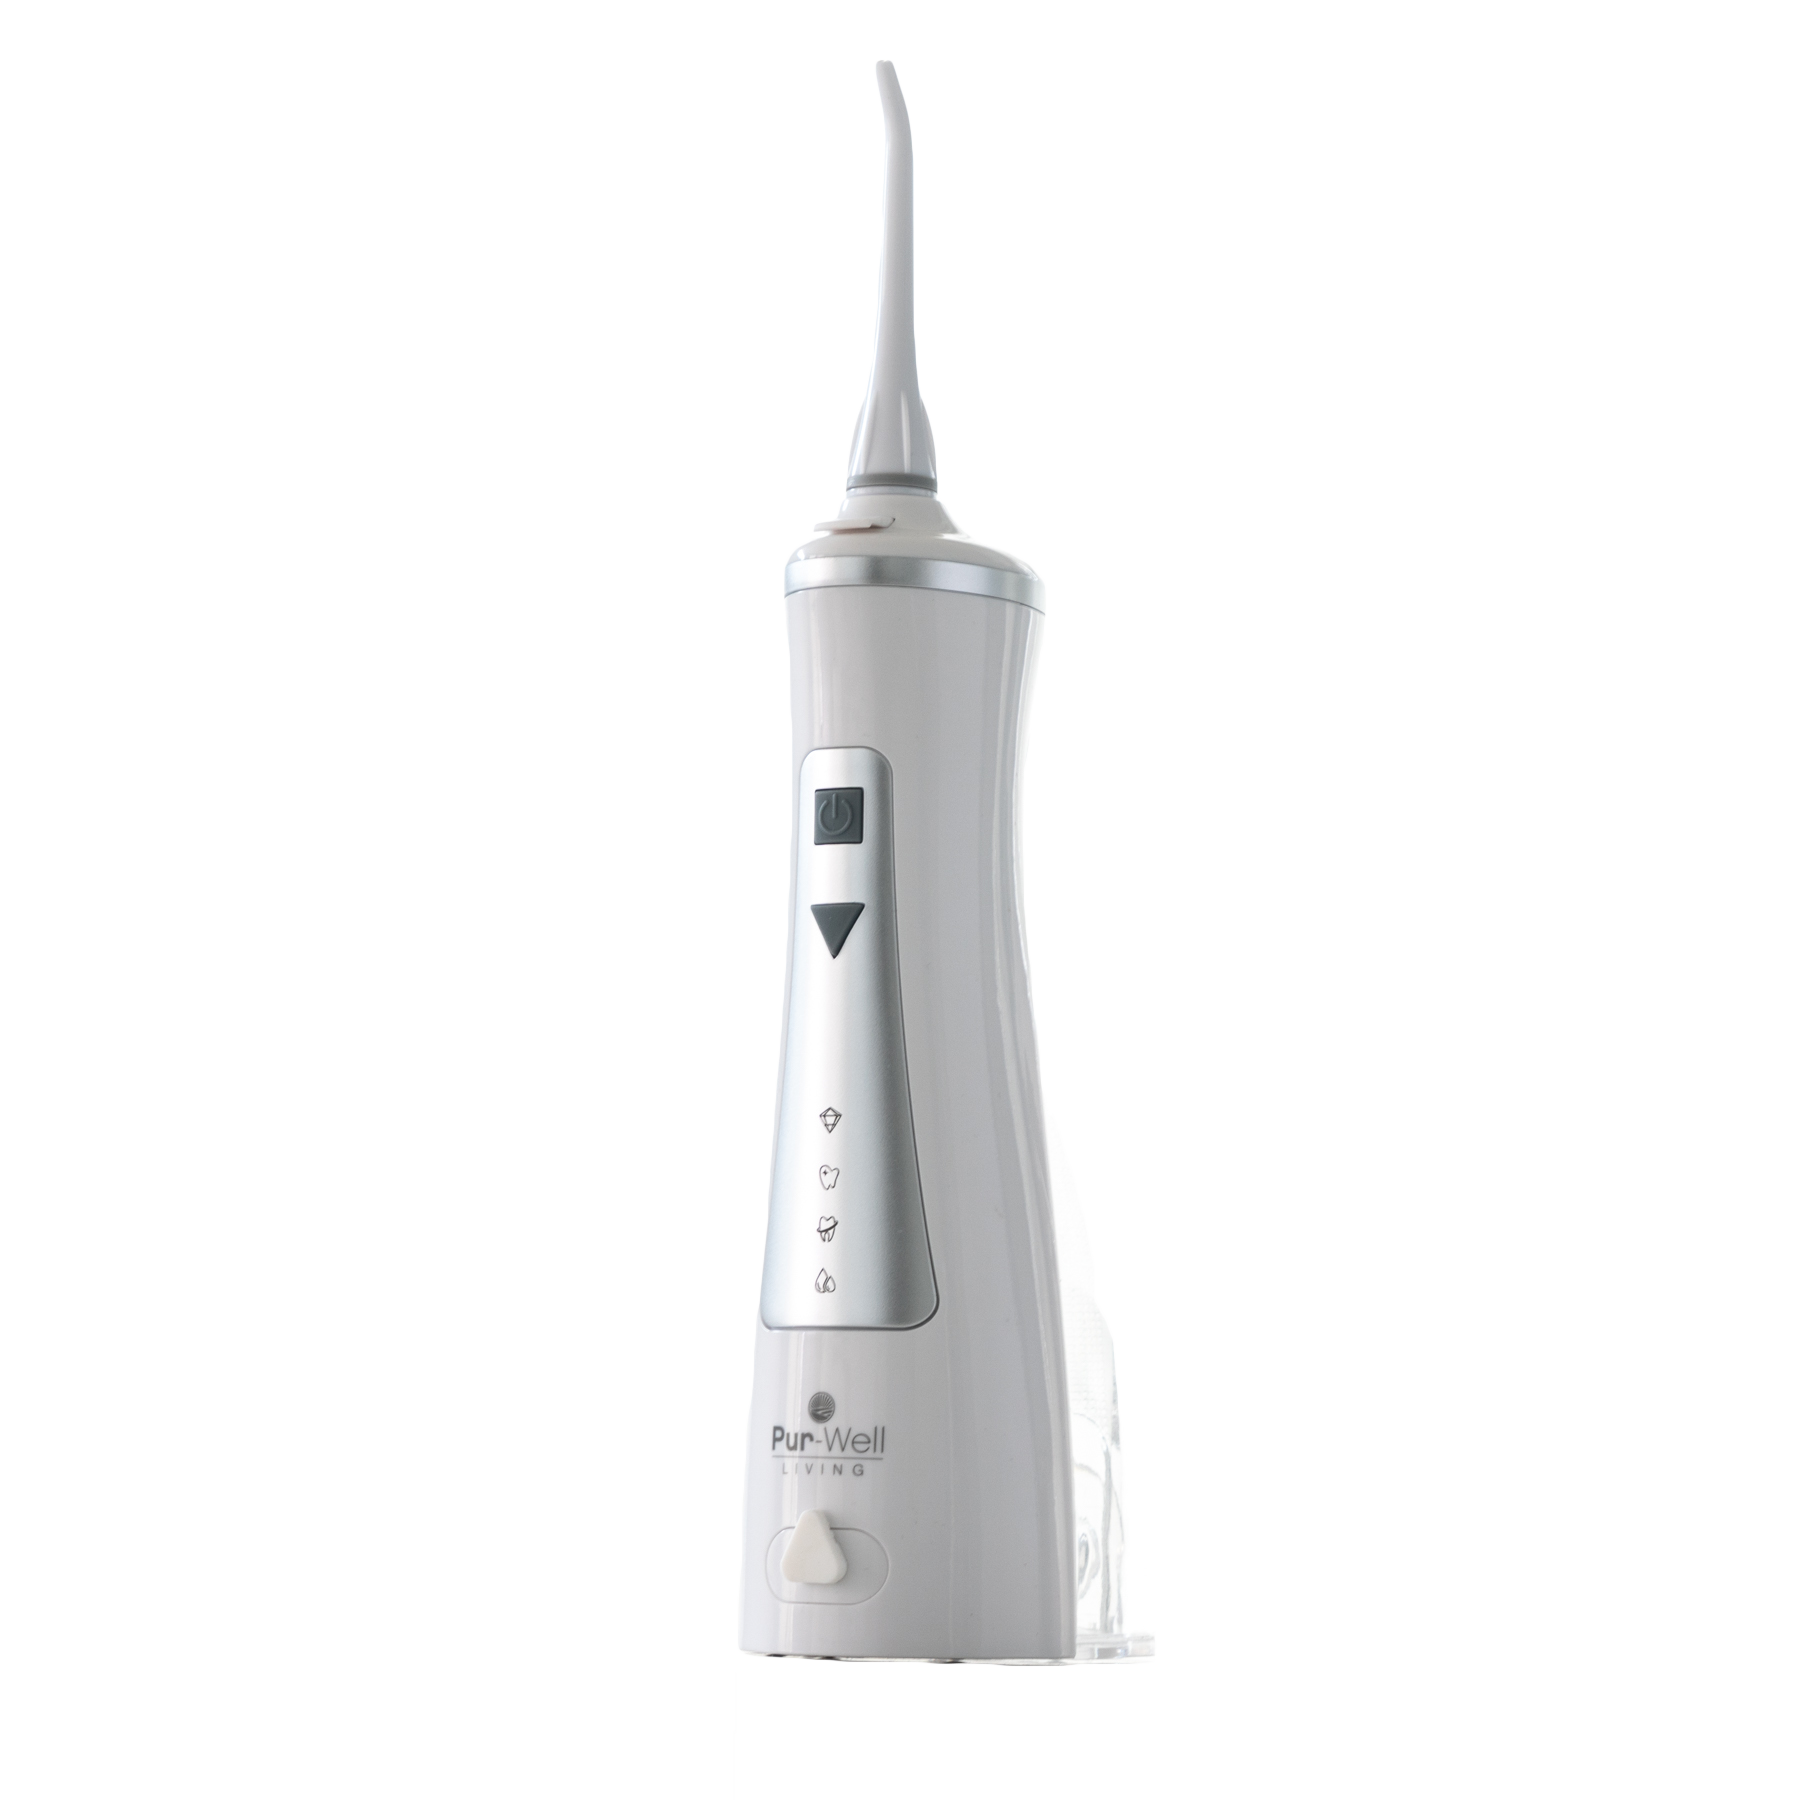 Pur-Well Living Pur Clean Smart Power Flosser Water Pick - image 6 of 7